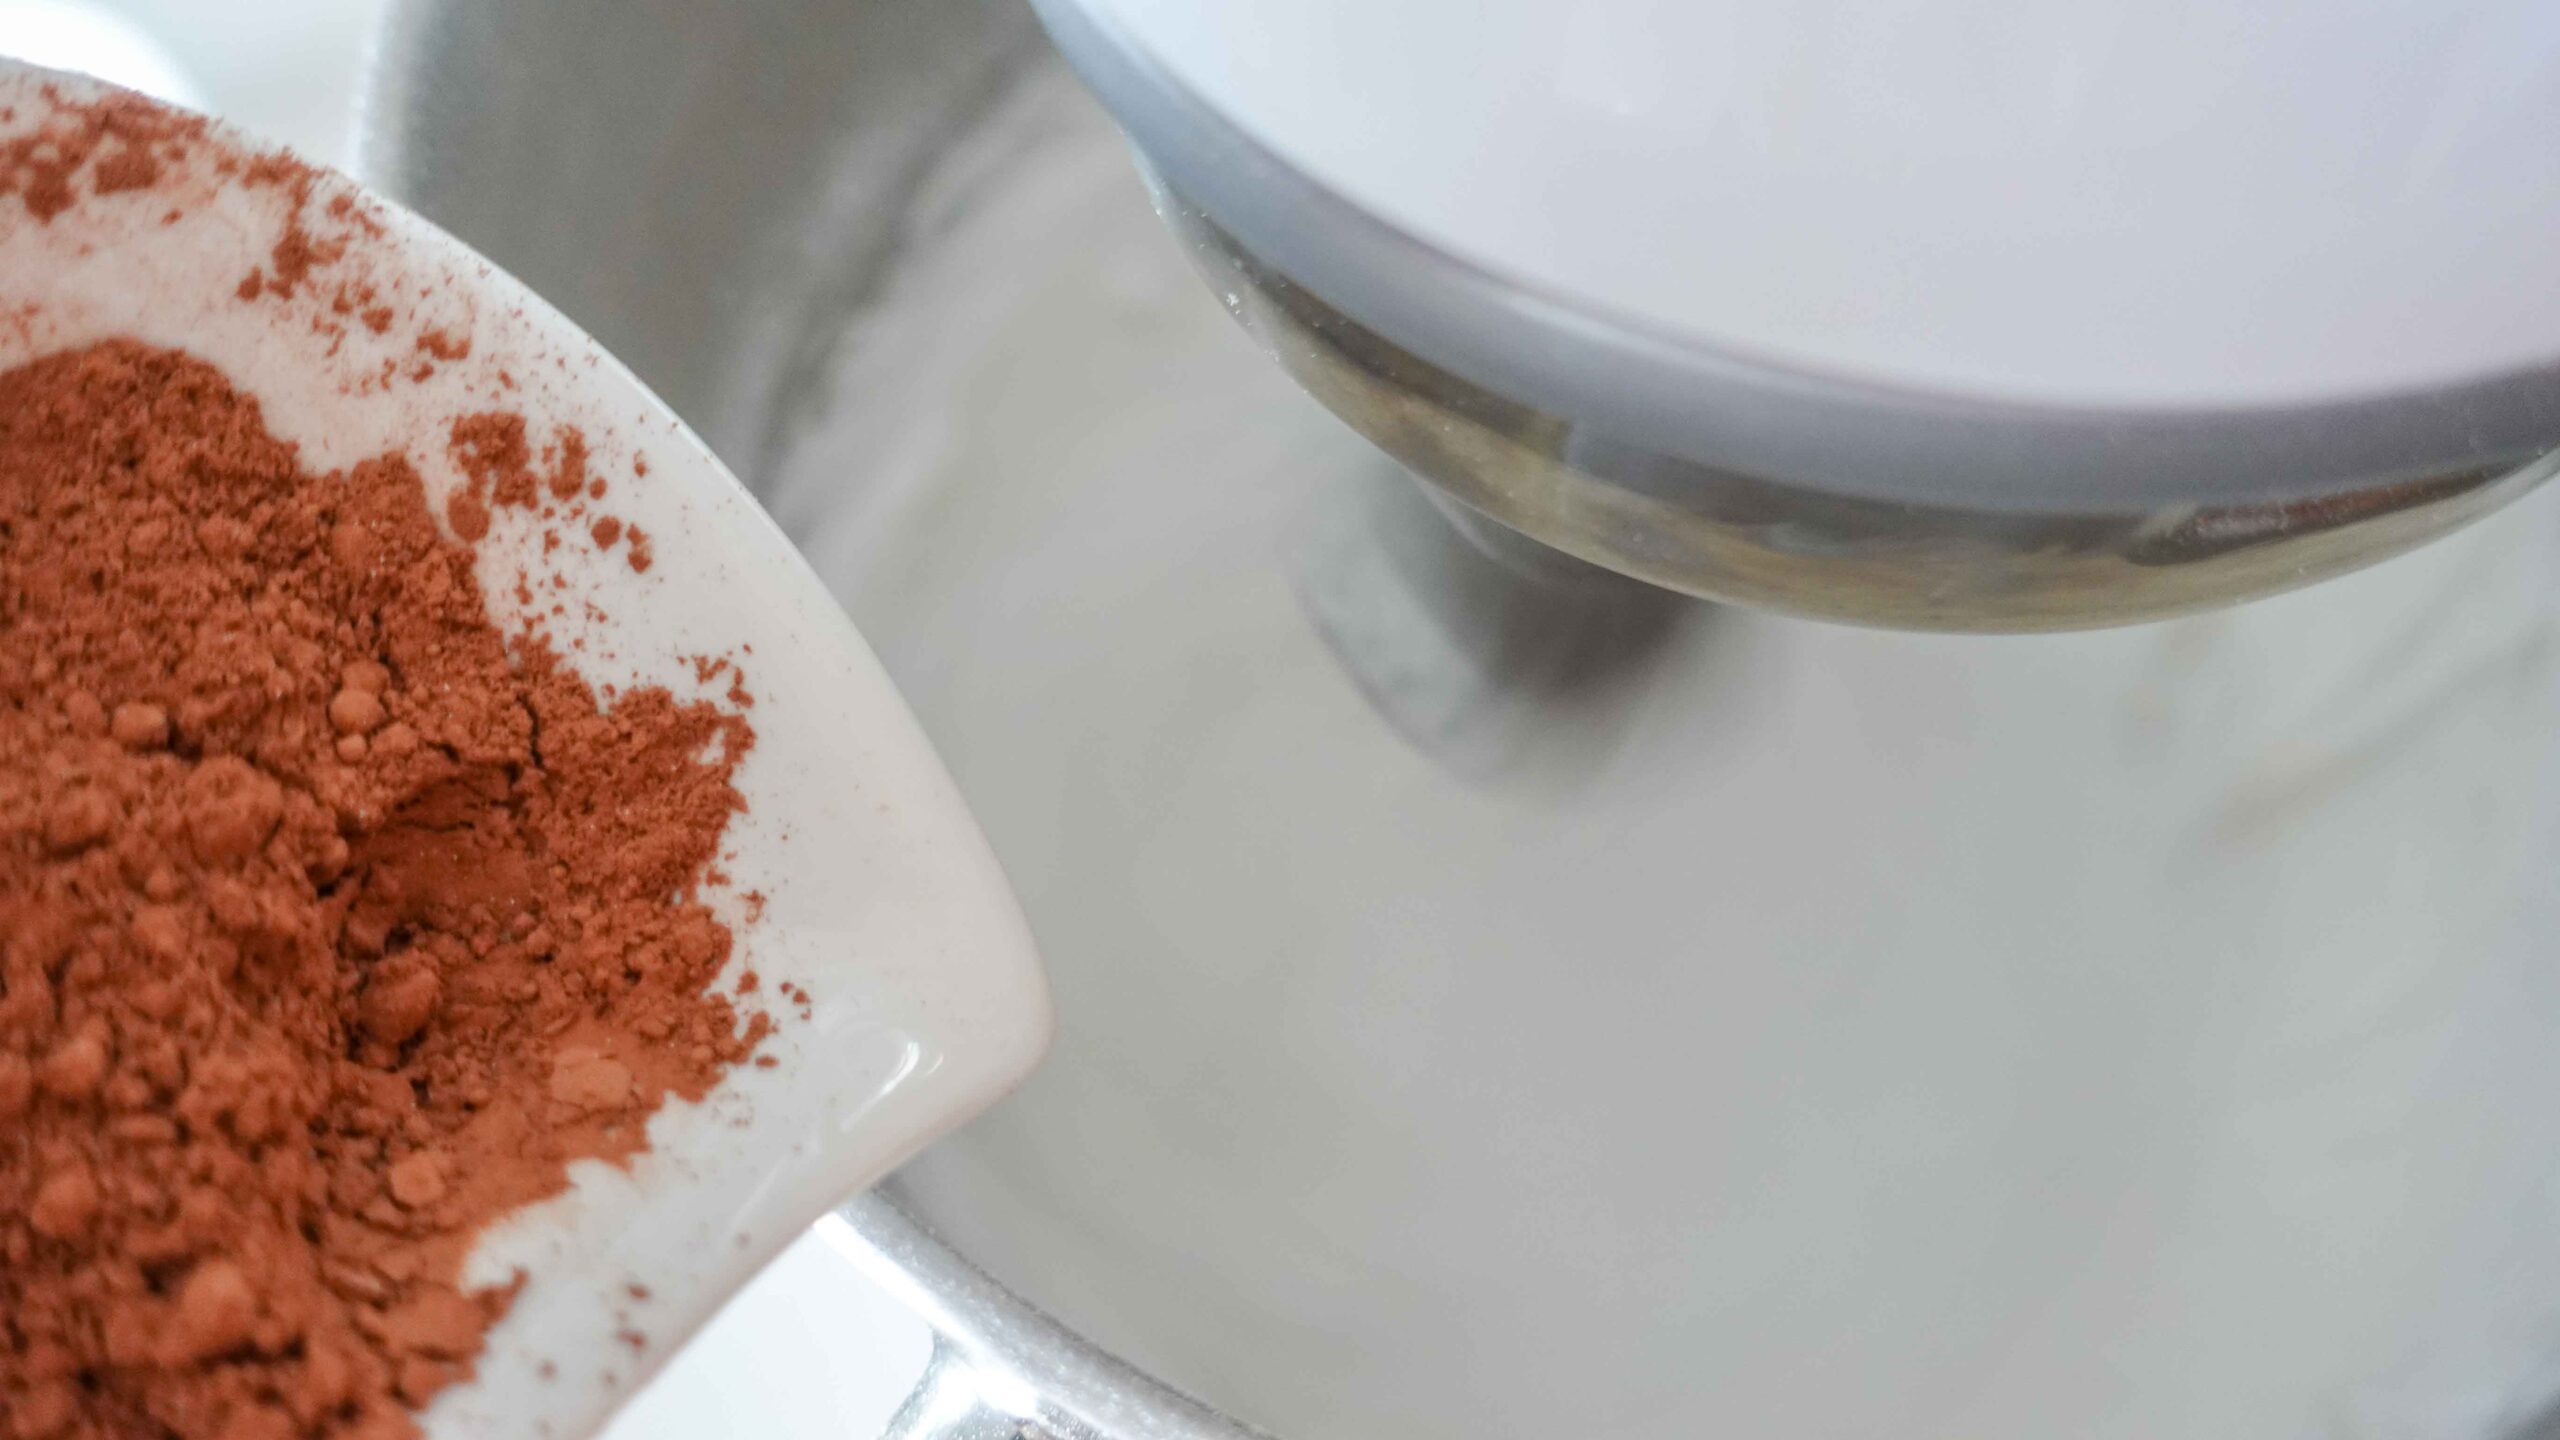 Adding cacao to a bowl with whipped egg whites